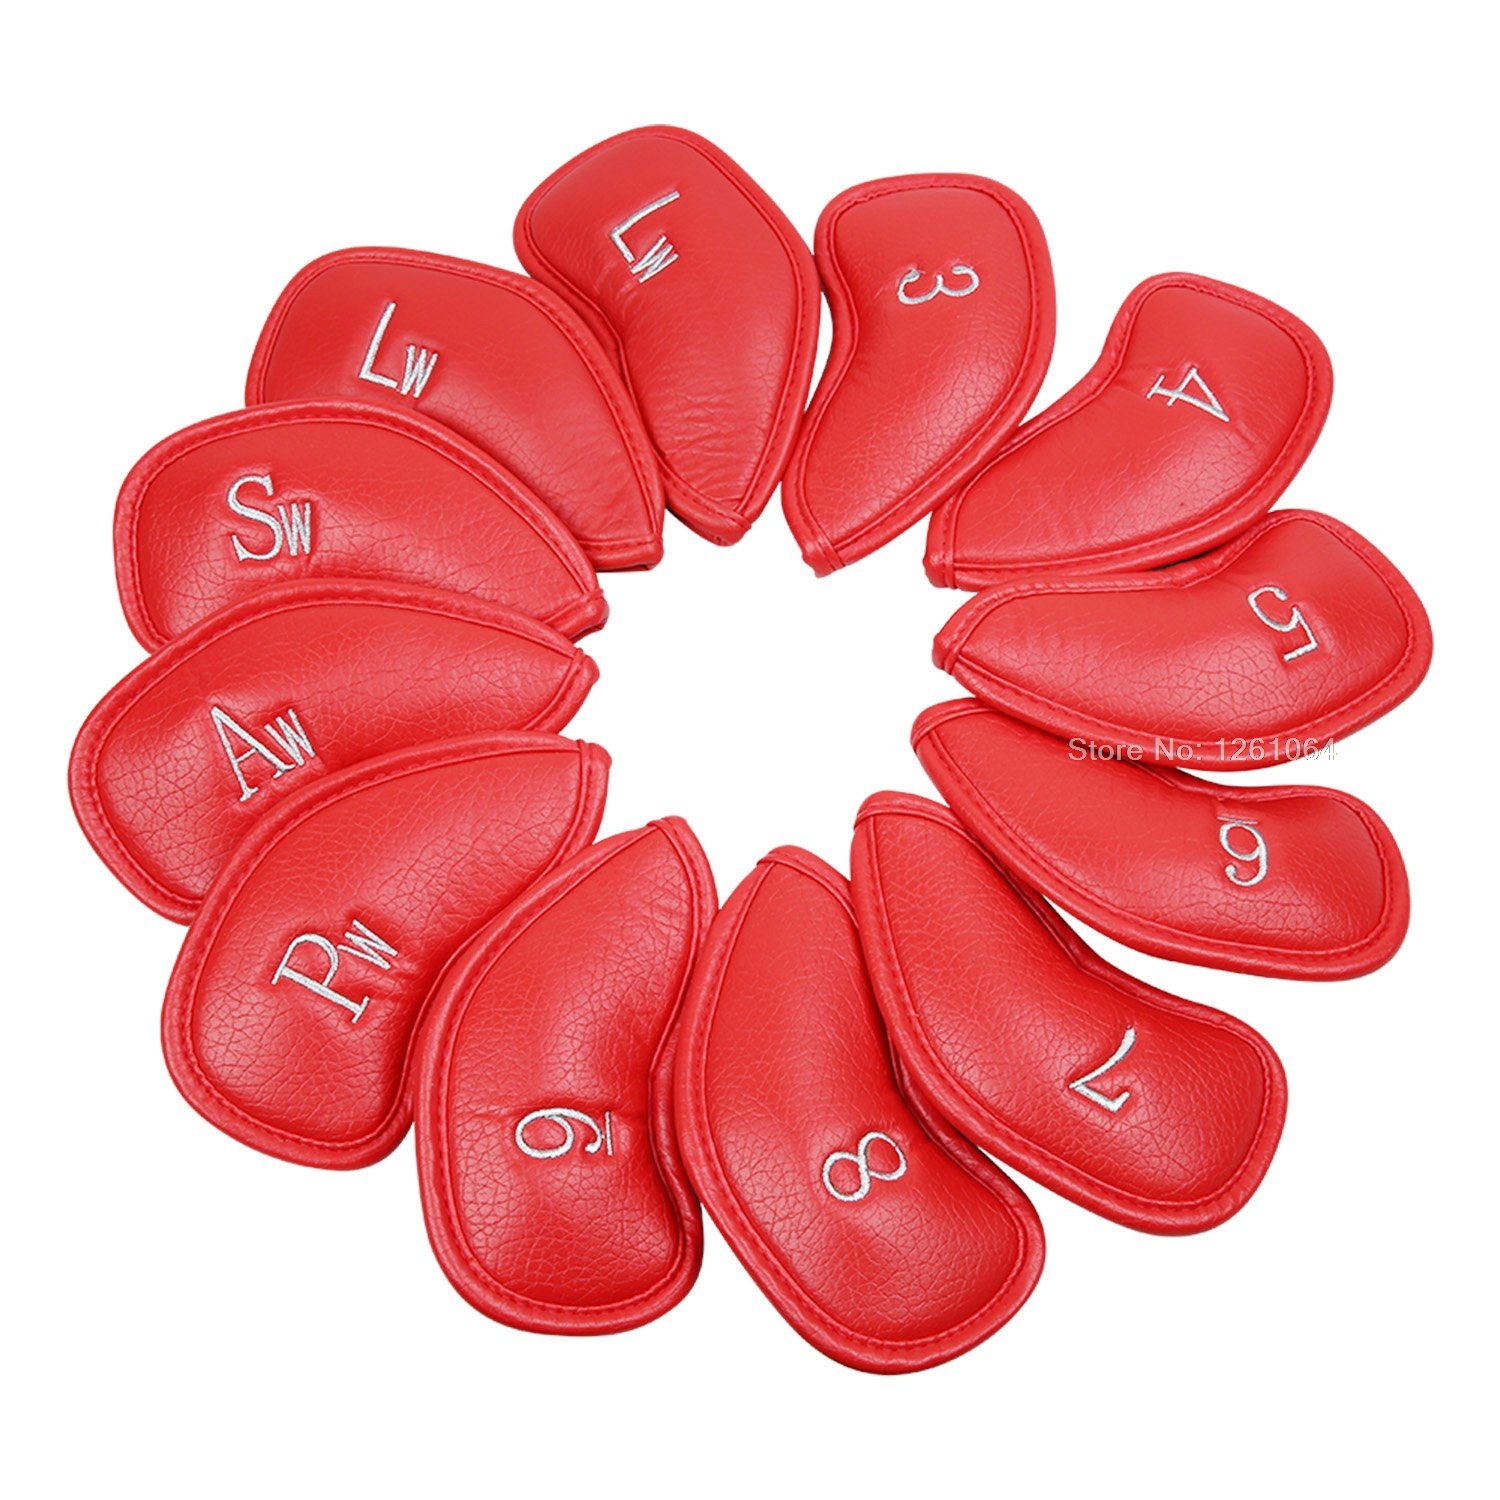 12pcs/set Golf Club Exquisite PU Golf Club Iron Protector With Number 3456789AwSwPwLw Covers